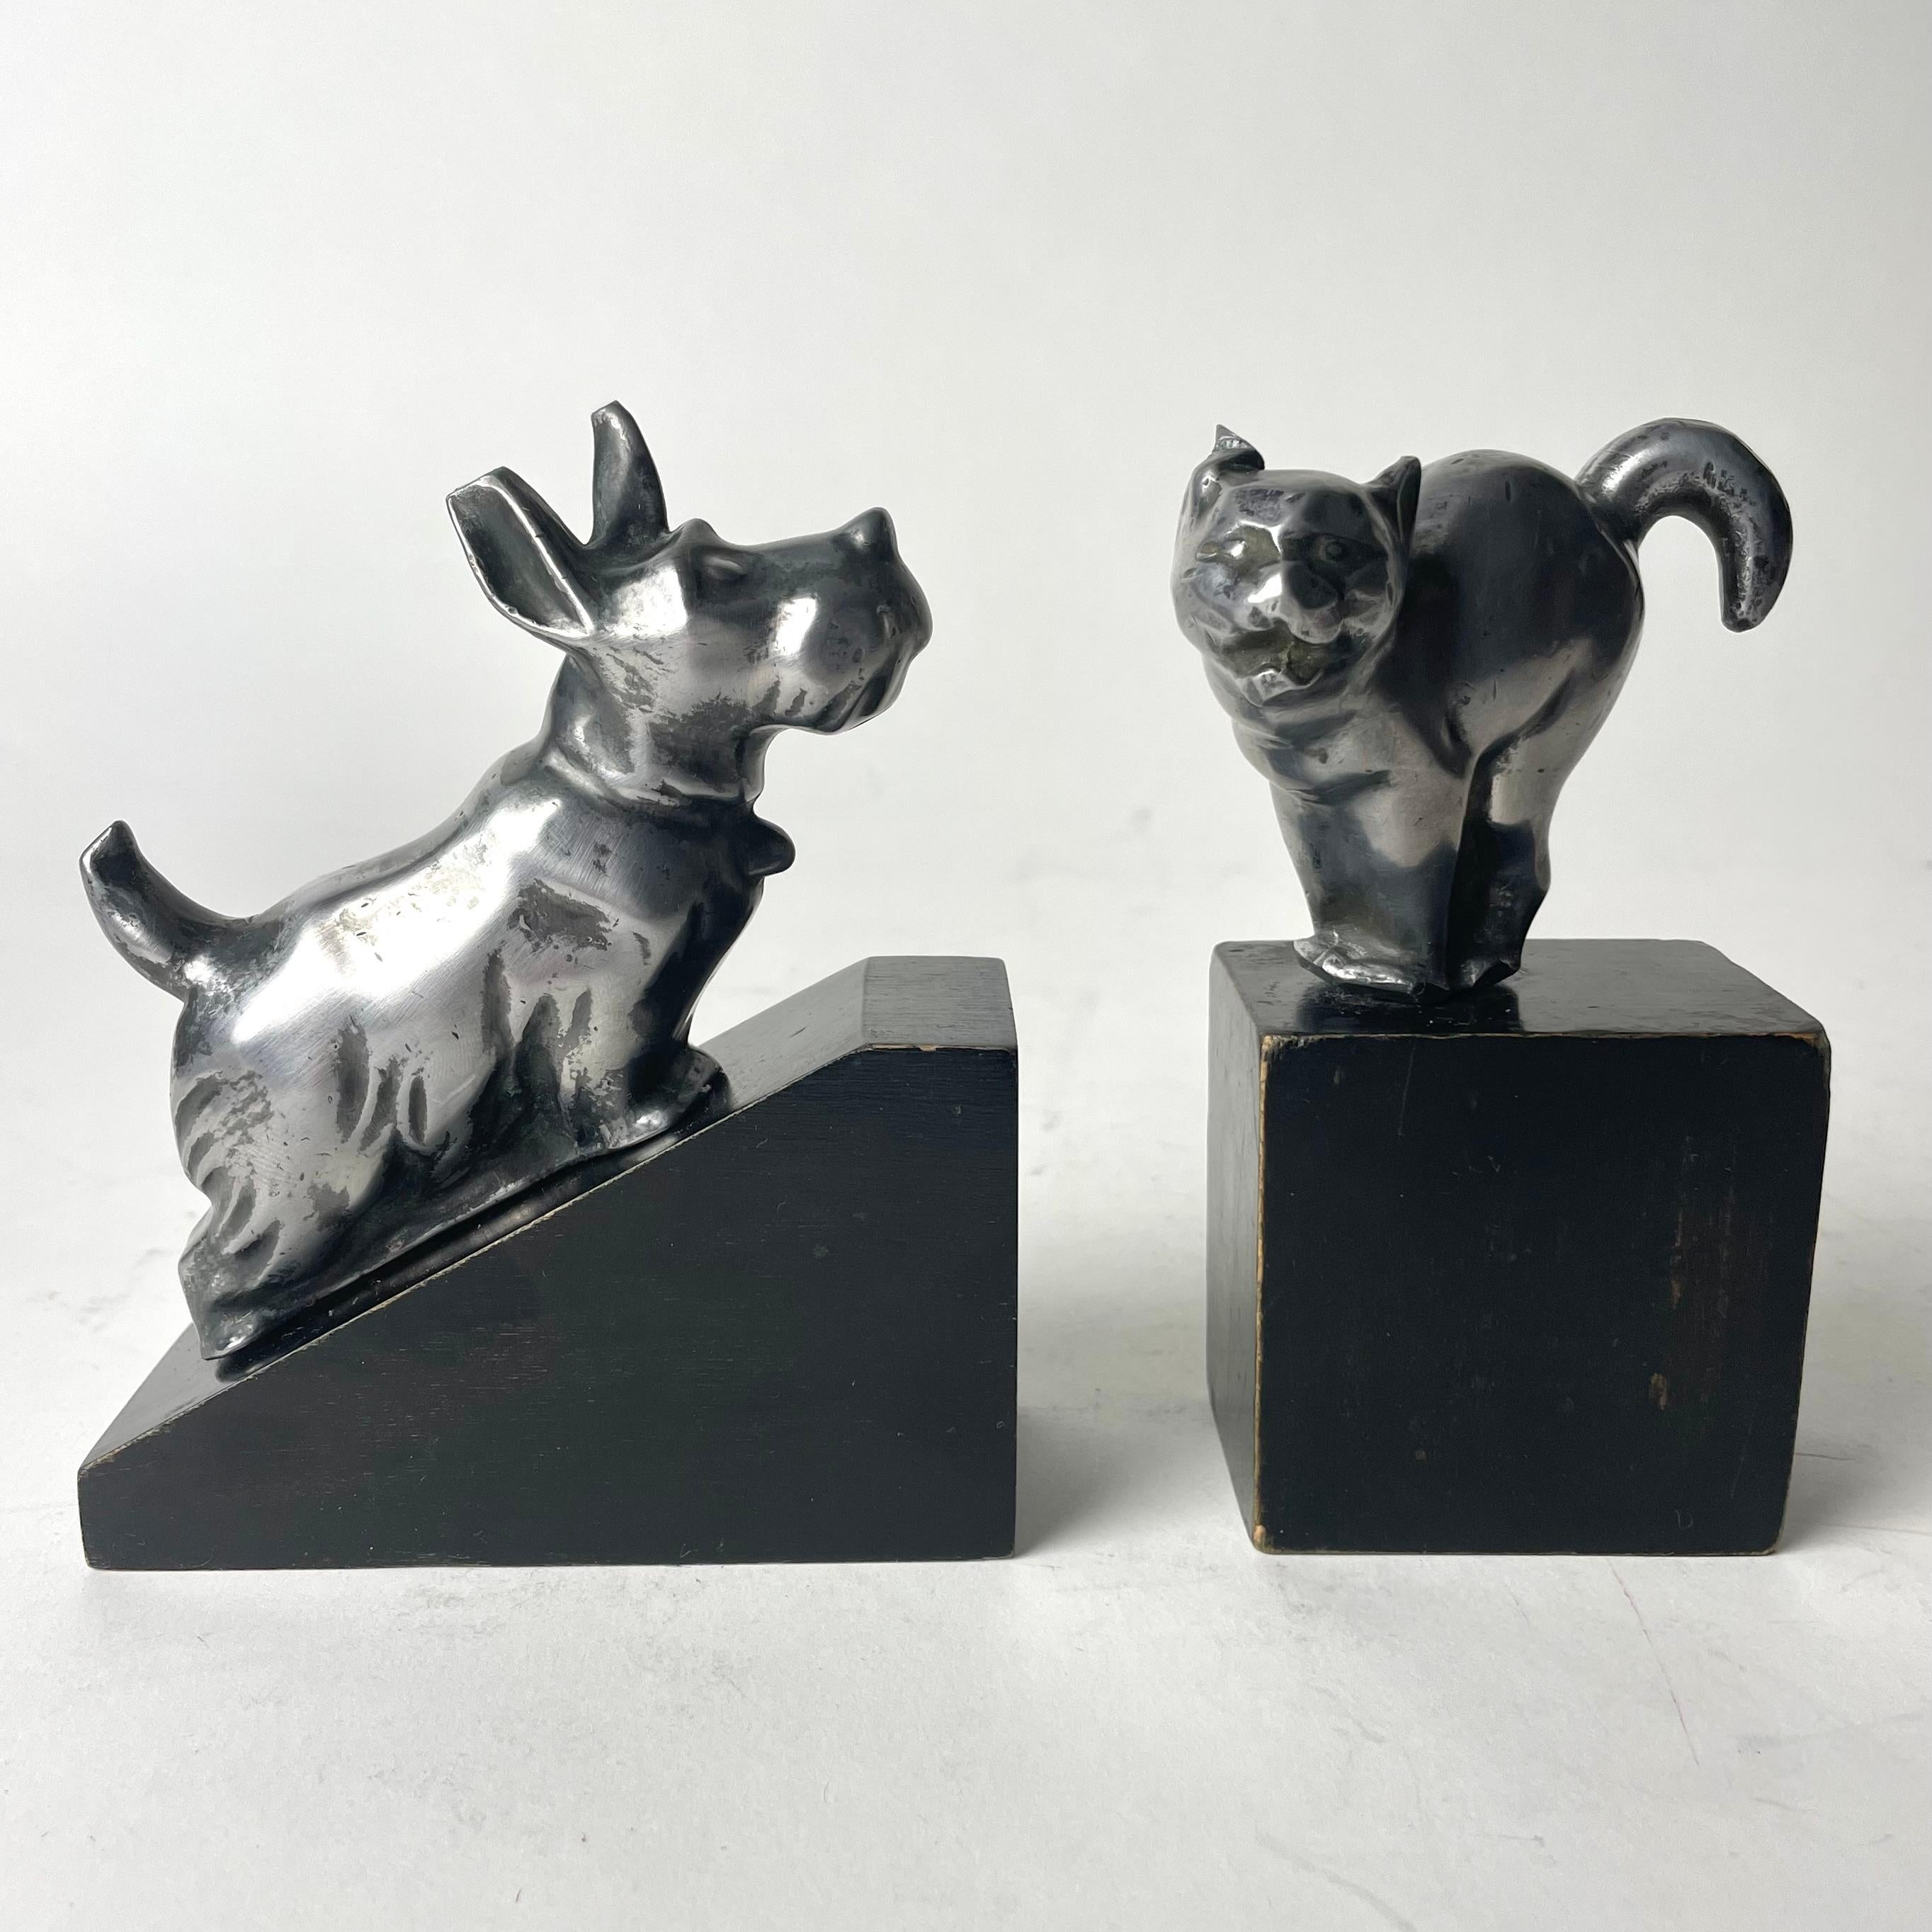 A charming pair of Art Deco Bookends with a dog and a cat from the 1920s-1930s. The animals are made in pewter and the base in black lacquered birch. Probably made in Sweden.

One of the cat’s ears with minor damage ( see photo)

Wear consistent